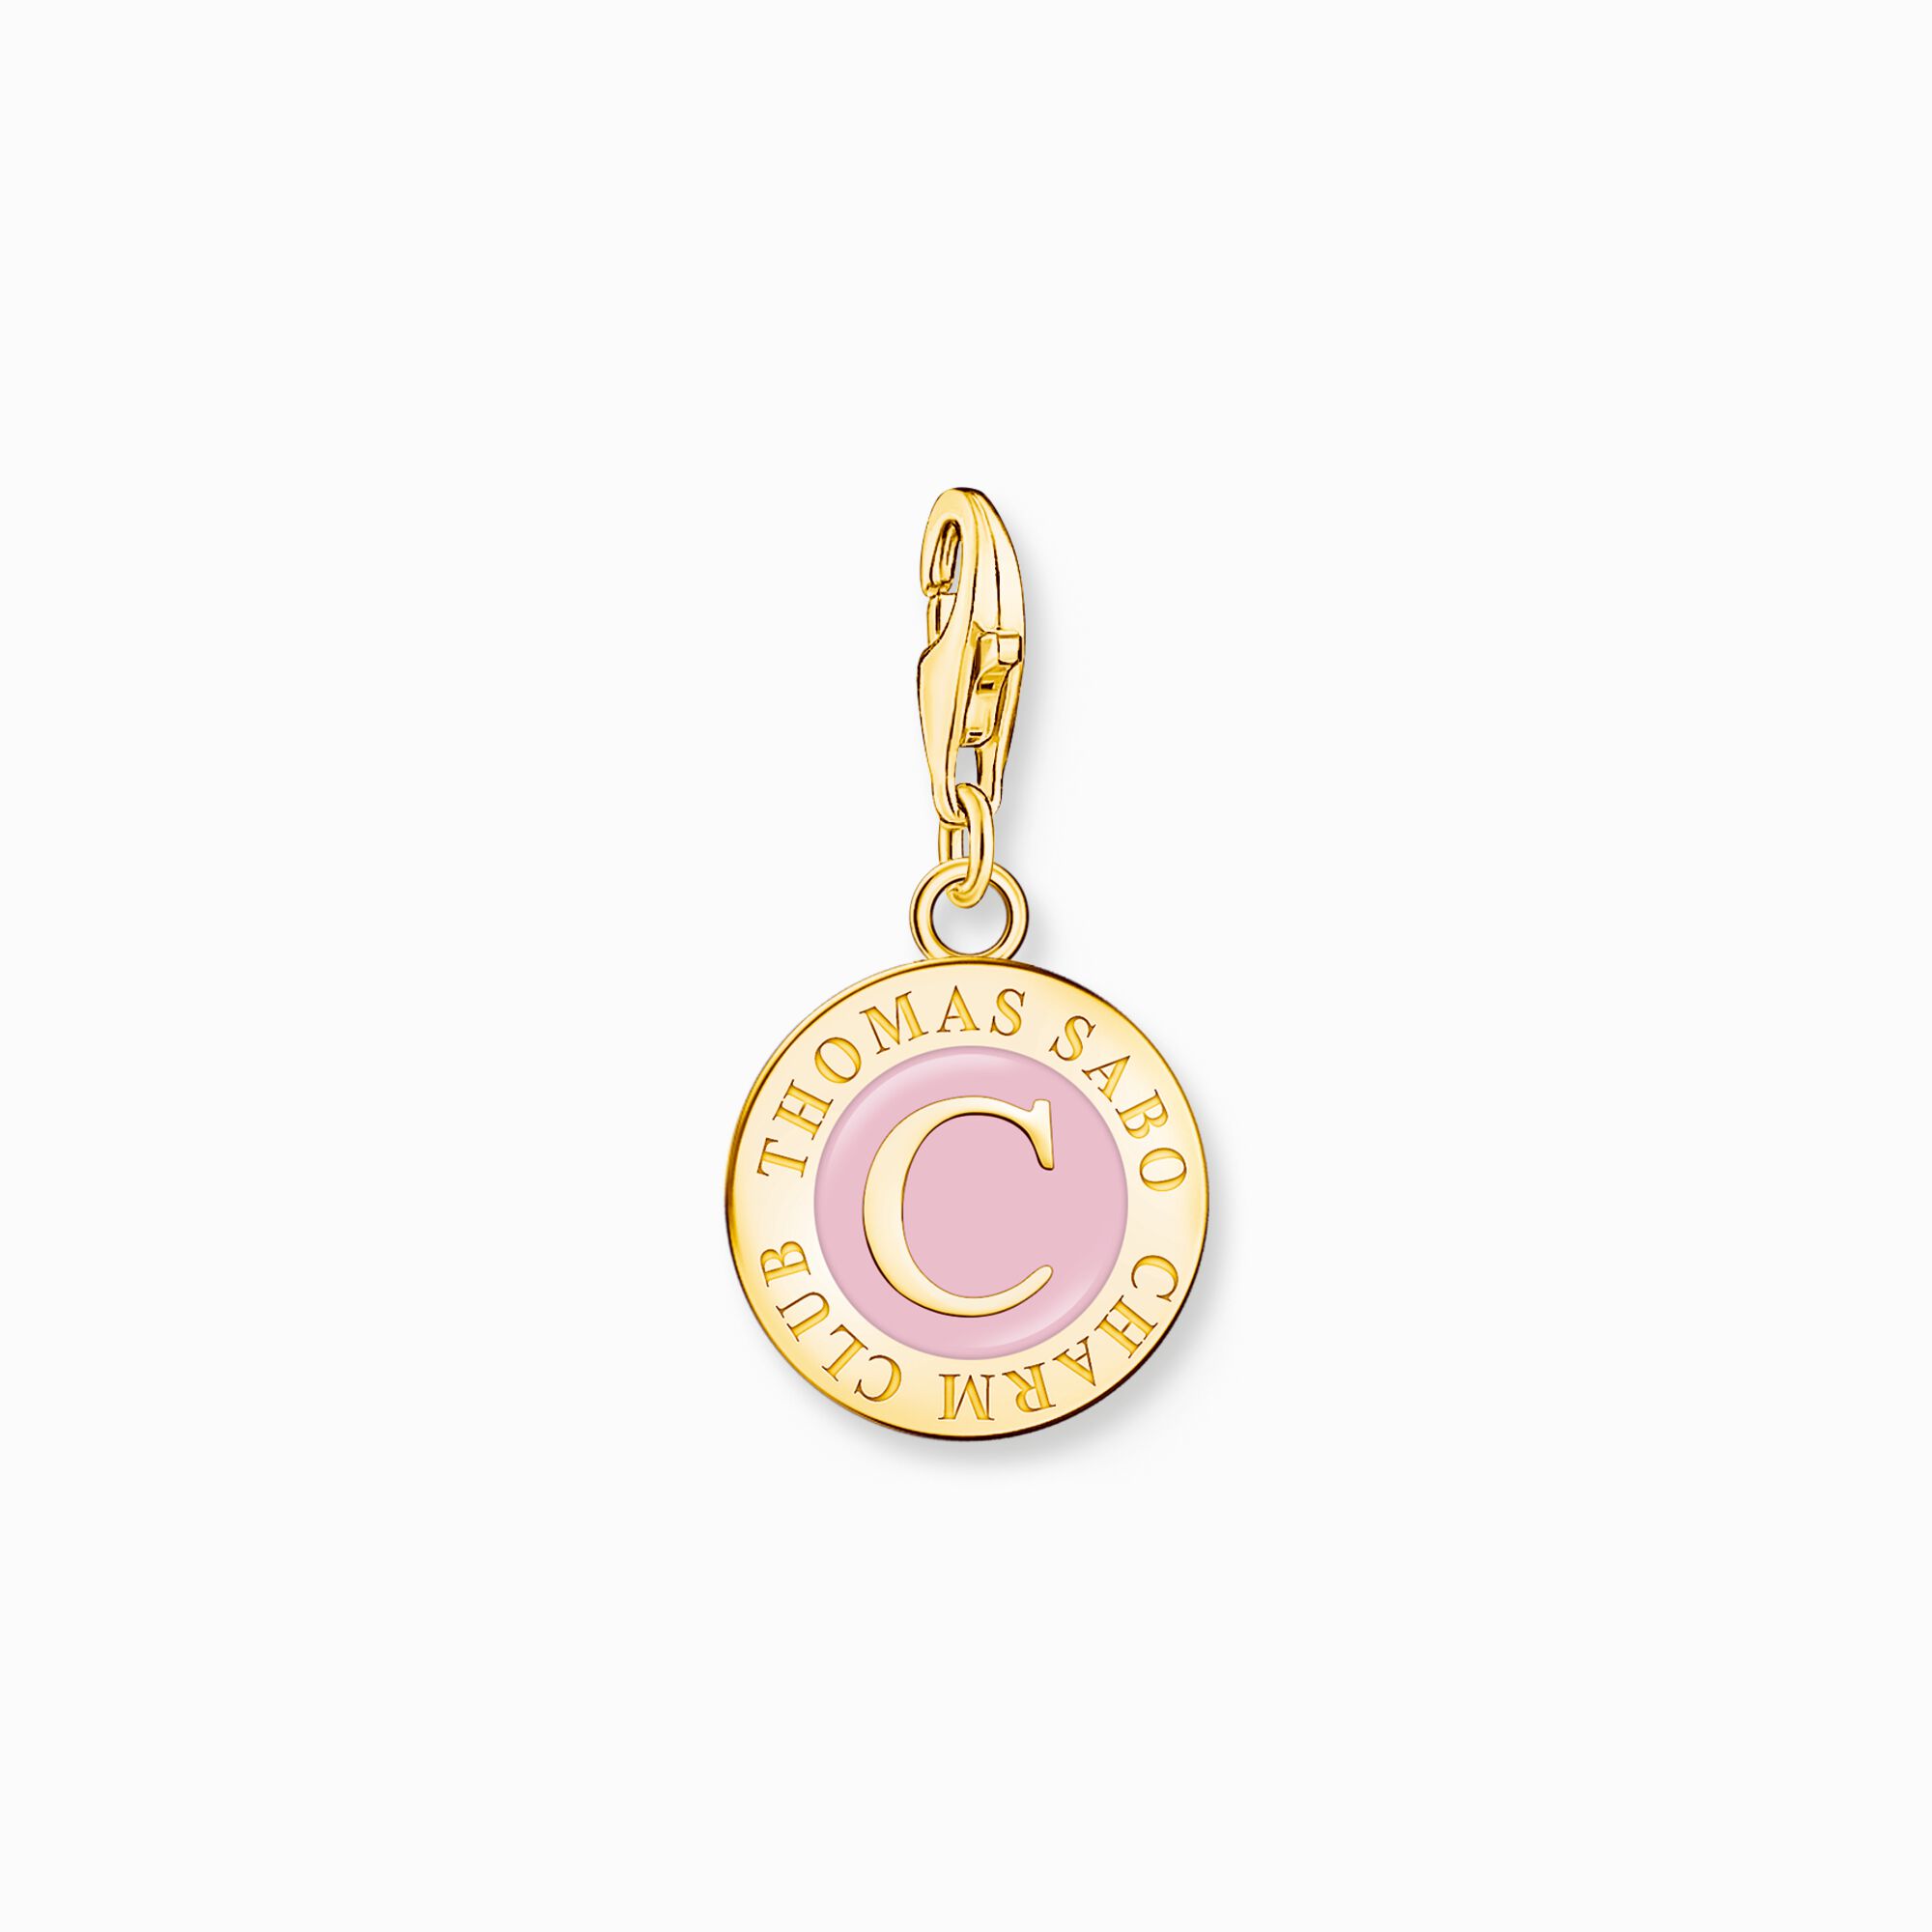 Member Charm pink Charmista Coin gold plated from the Charm Club collection in the THOMAS SABO online store